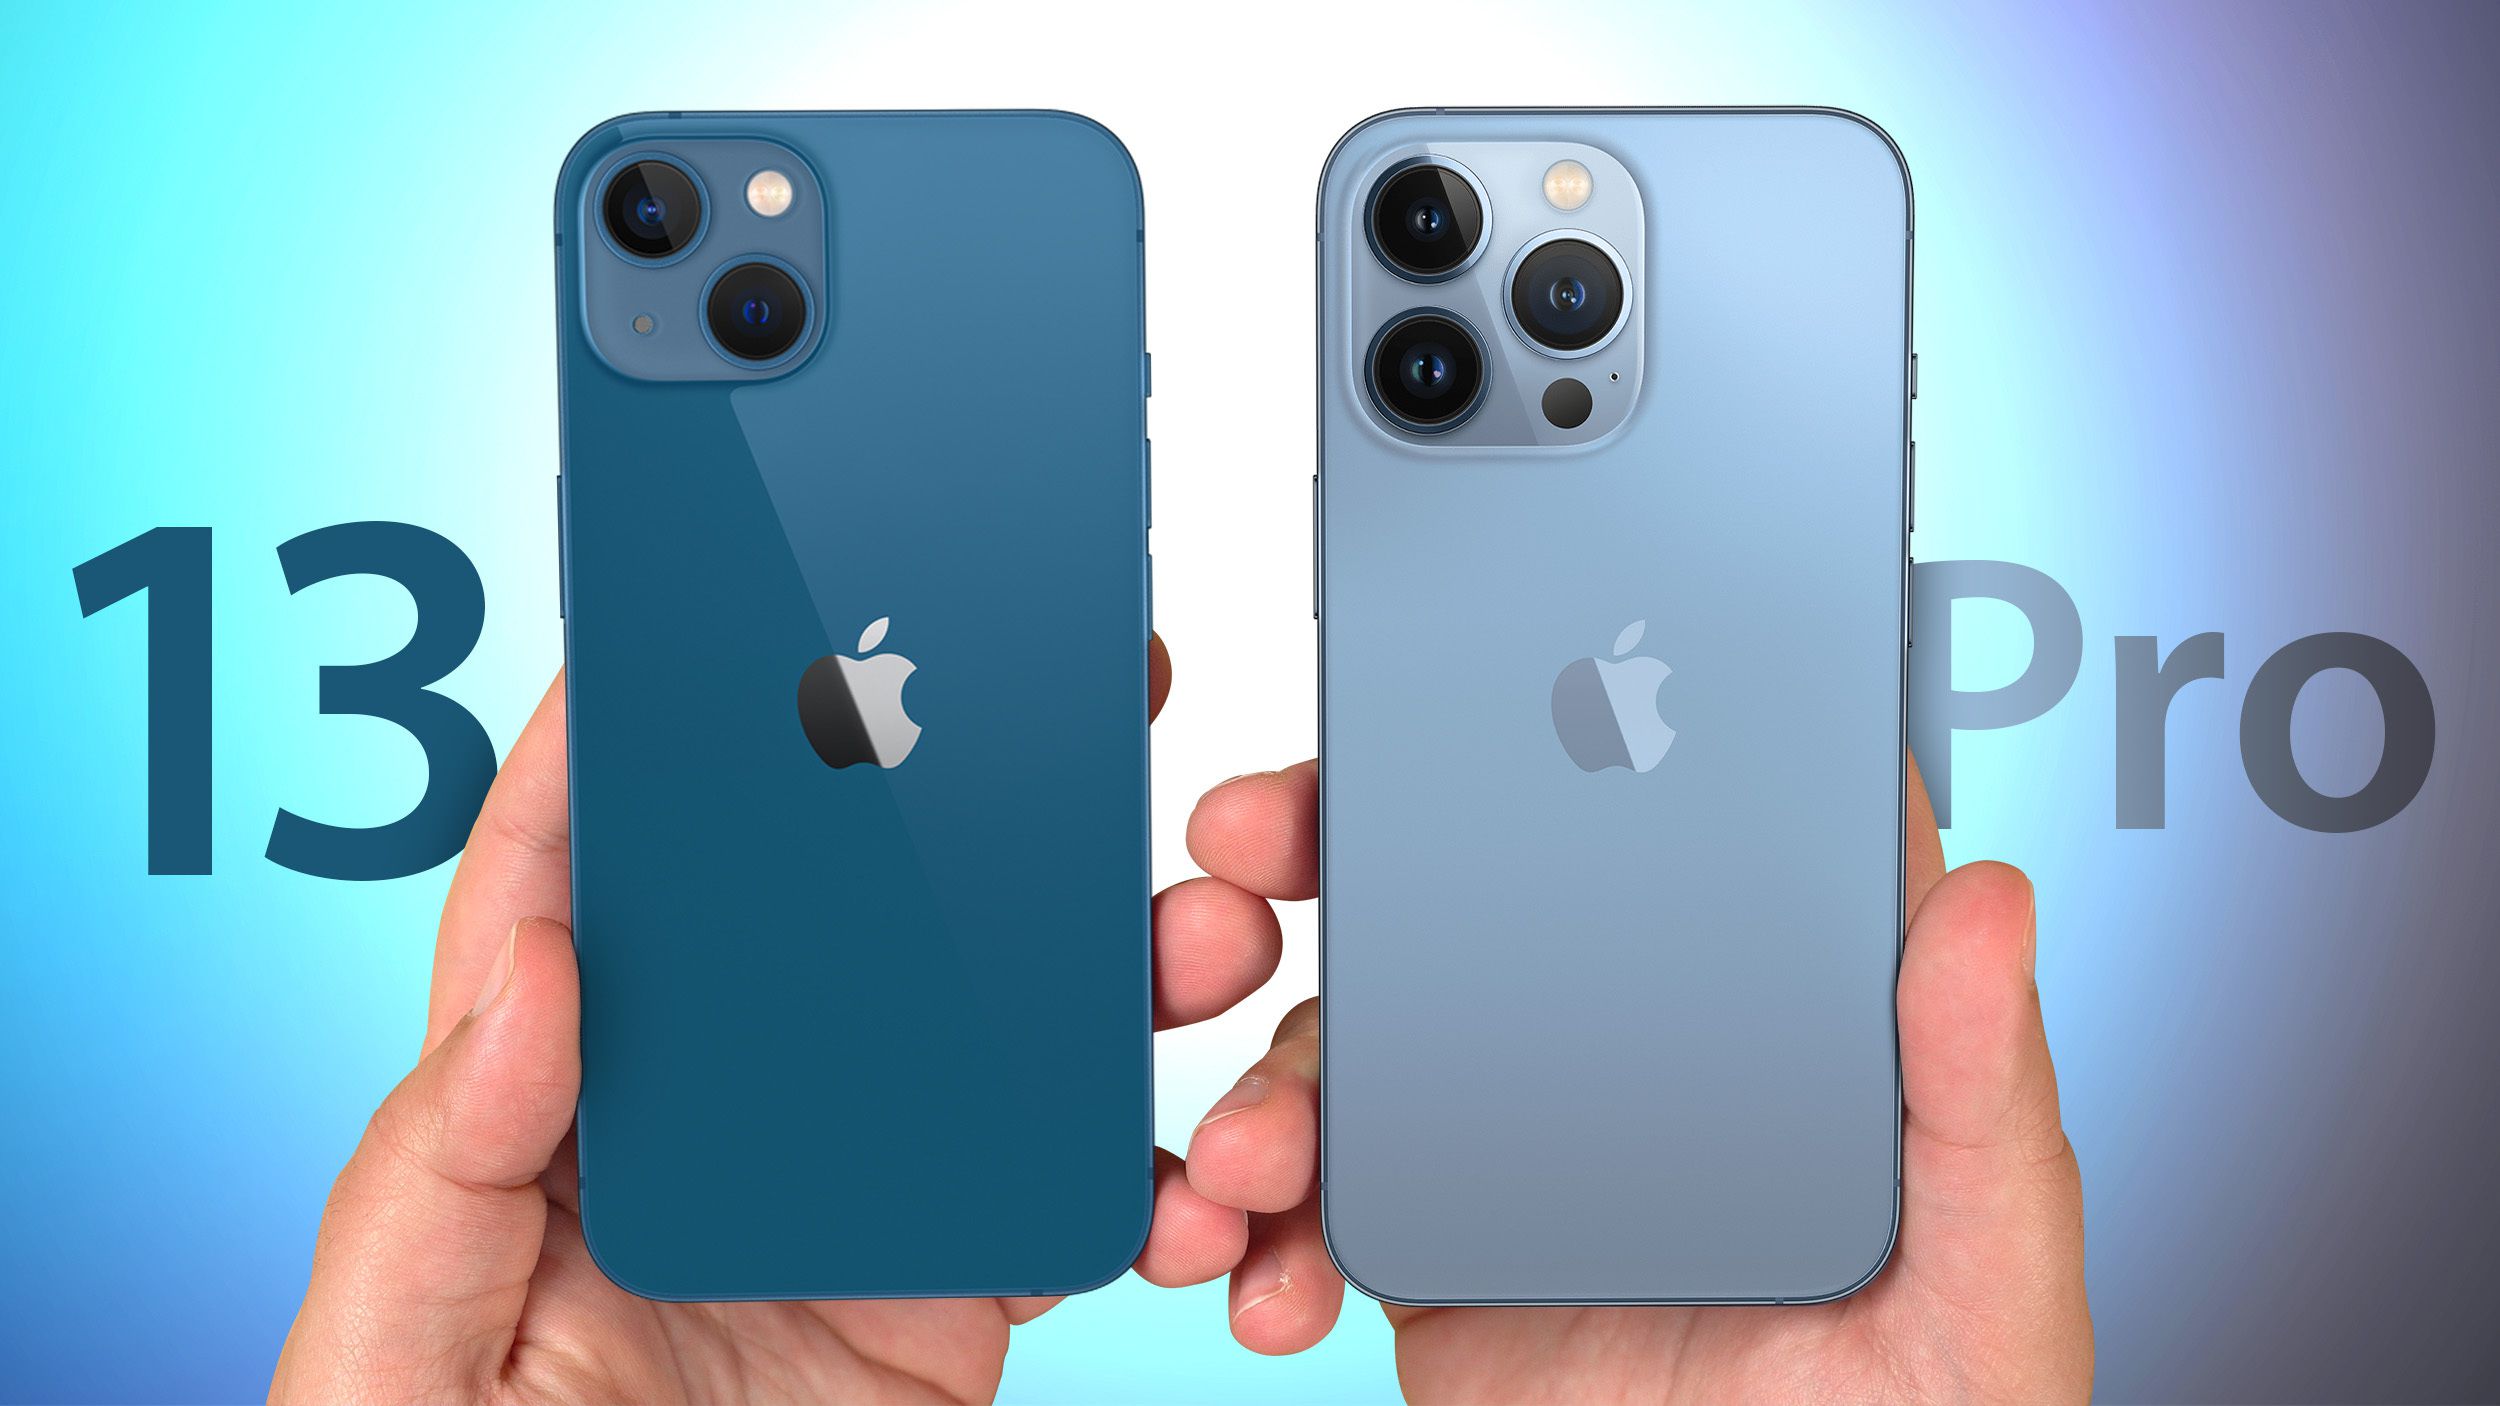 iPhone 13 Pro vs iPhone 13 Pro Max - Which Should You Choose? 